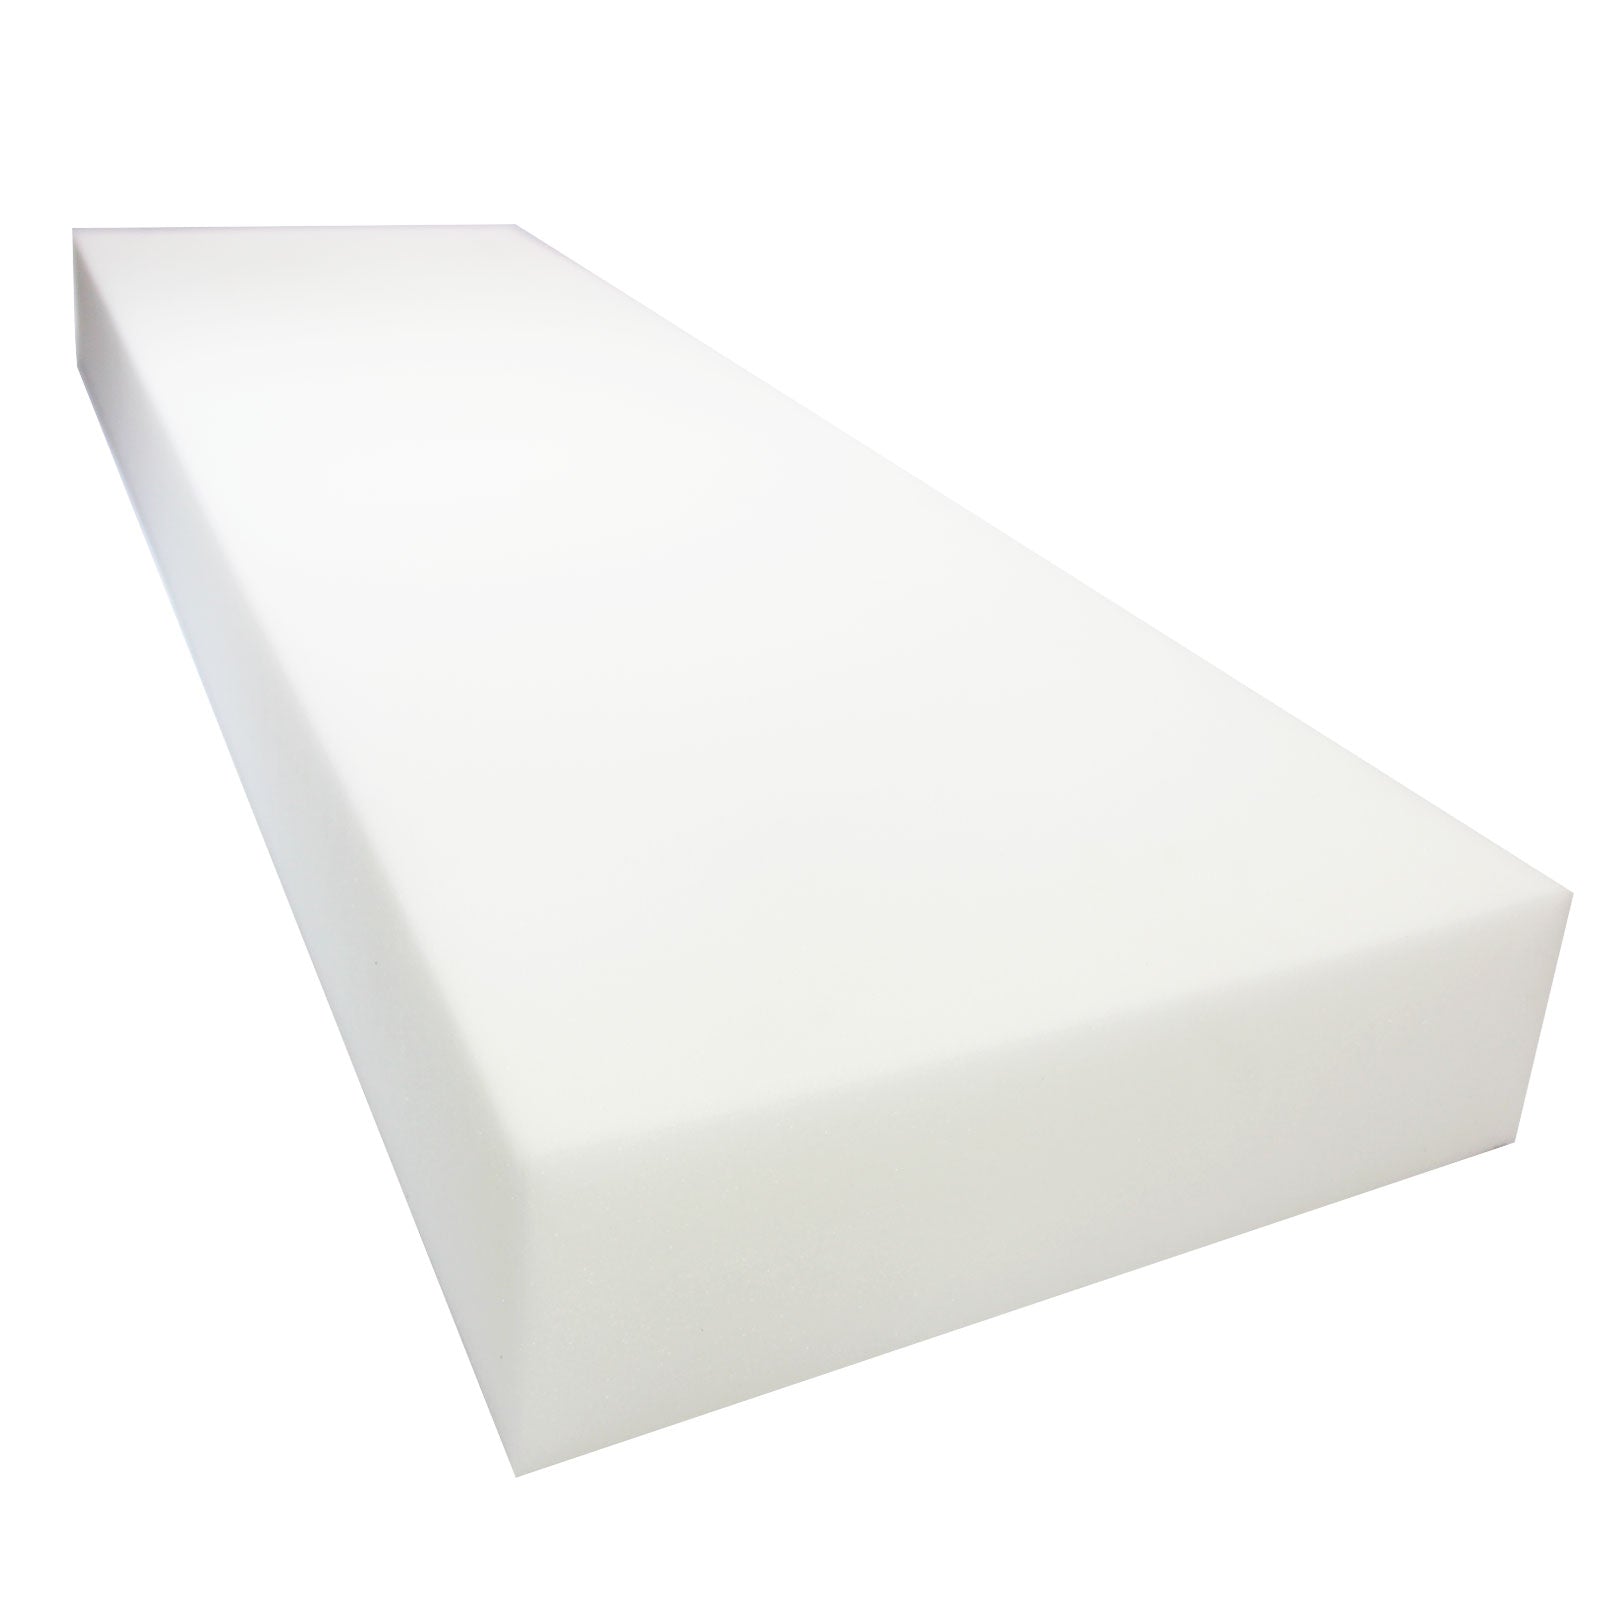 High Density Upholstery Foam Cushion 6T x 24W x 80L (50ILD) Extra Firm  Couch Cushion Replacement, Foam Padding, (White) by Ritchie Foam 